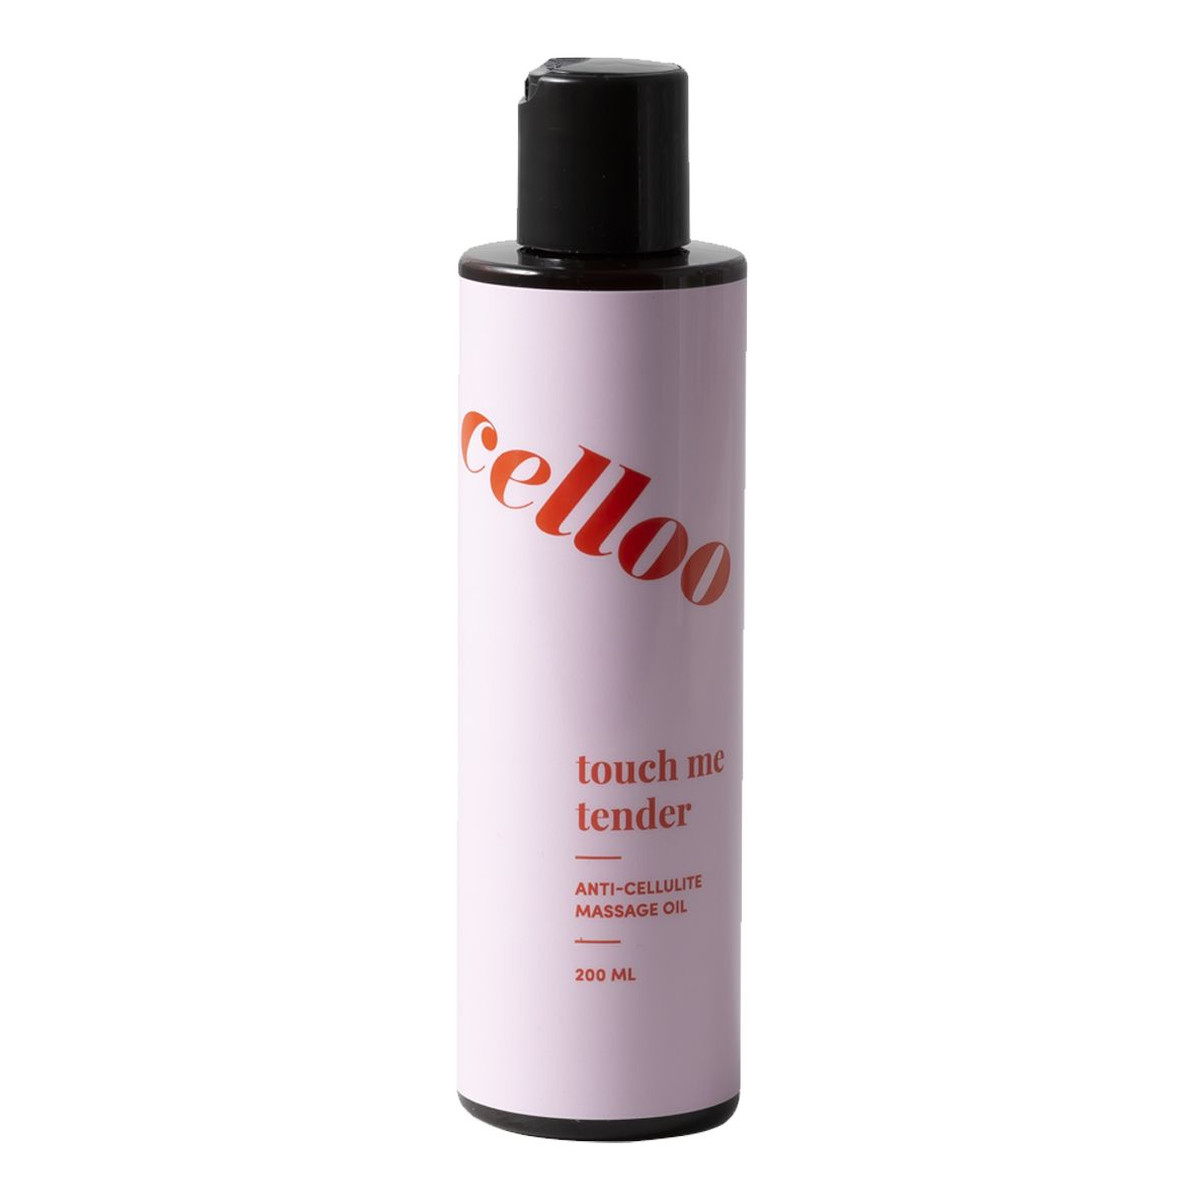 Celloo Touch Me Tender Olejek antycellulitowy do masażu 200ml